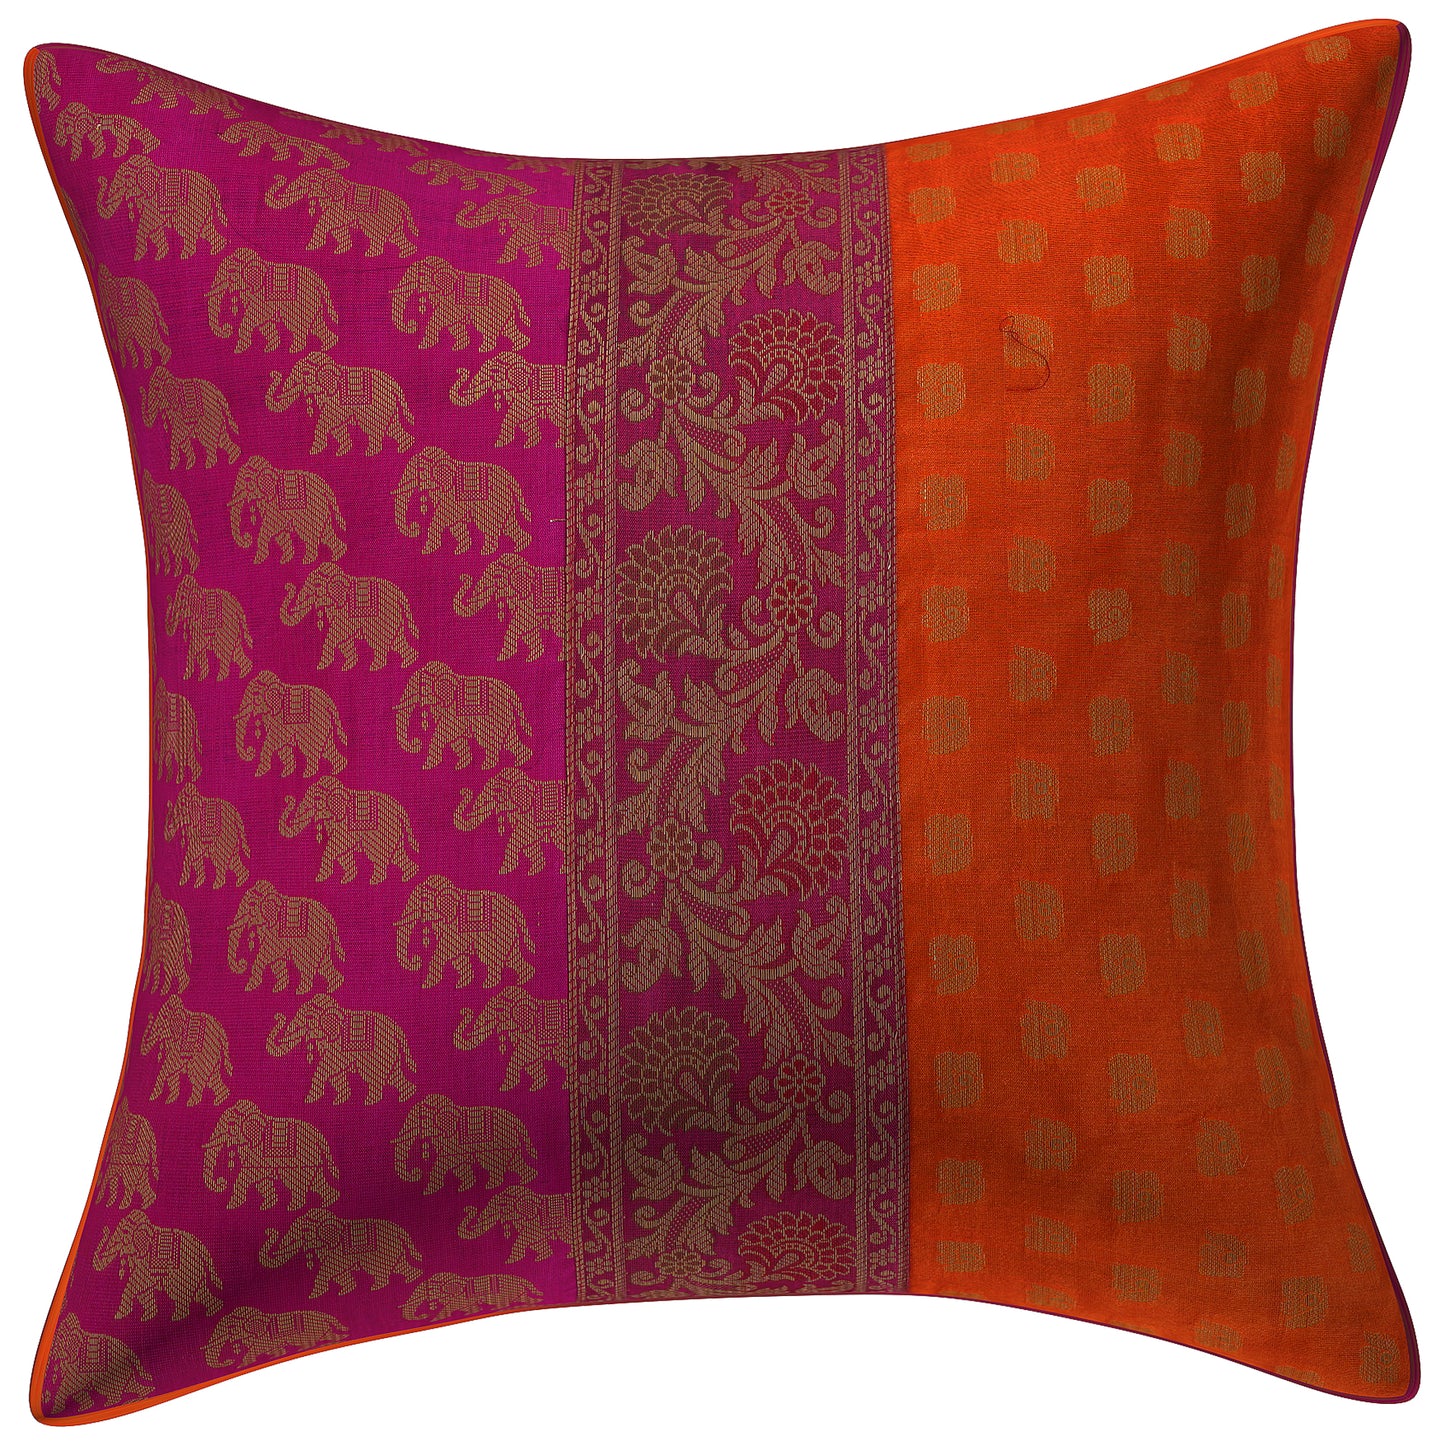 Indian Ethnic Brocade Silk Pink & Orange Elephant cushion Cover Throw Pillow for Couch Sofa Home Décor Pillow Cover 16X16 In Set 2 Pc